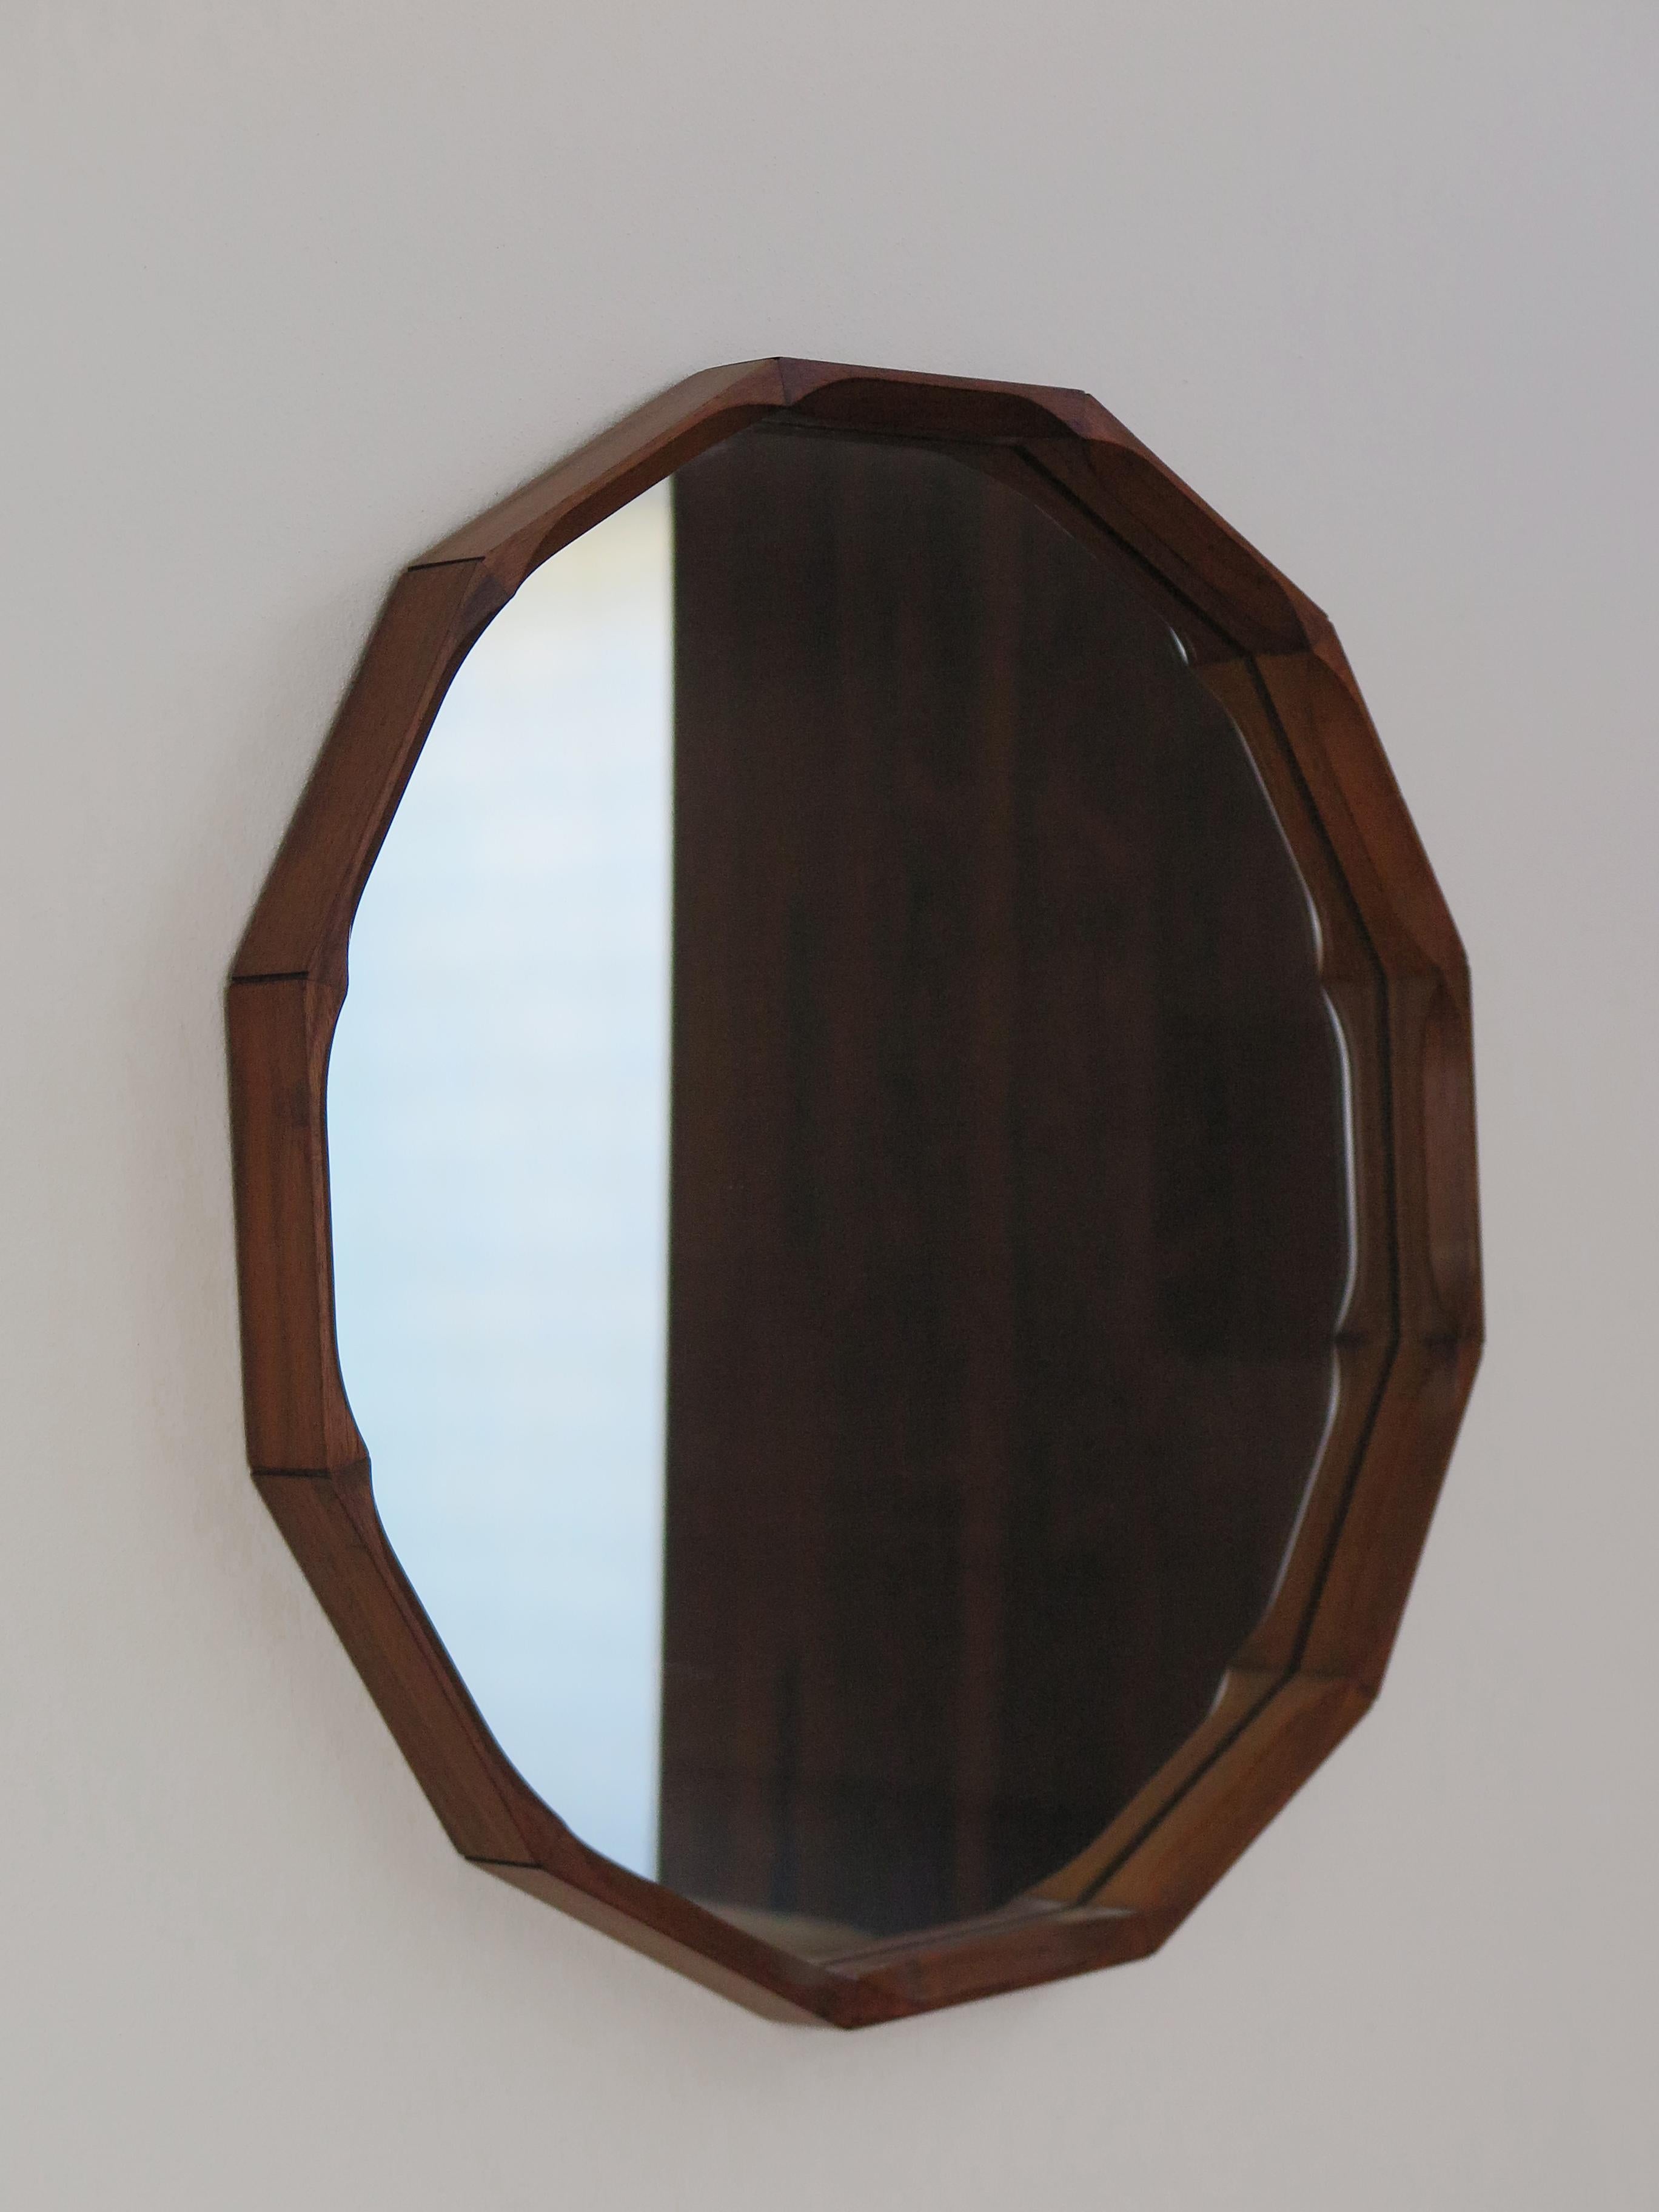 Italian dodecagonal, vintage modern antique wall mirror designed by designer Dino Cavalli and produced by Tredici with finely crafted solid walnut frame and special frame details as shown in photos, 1960s Italy production